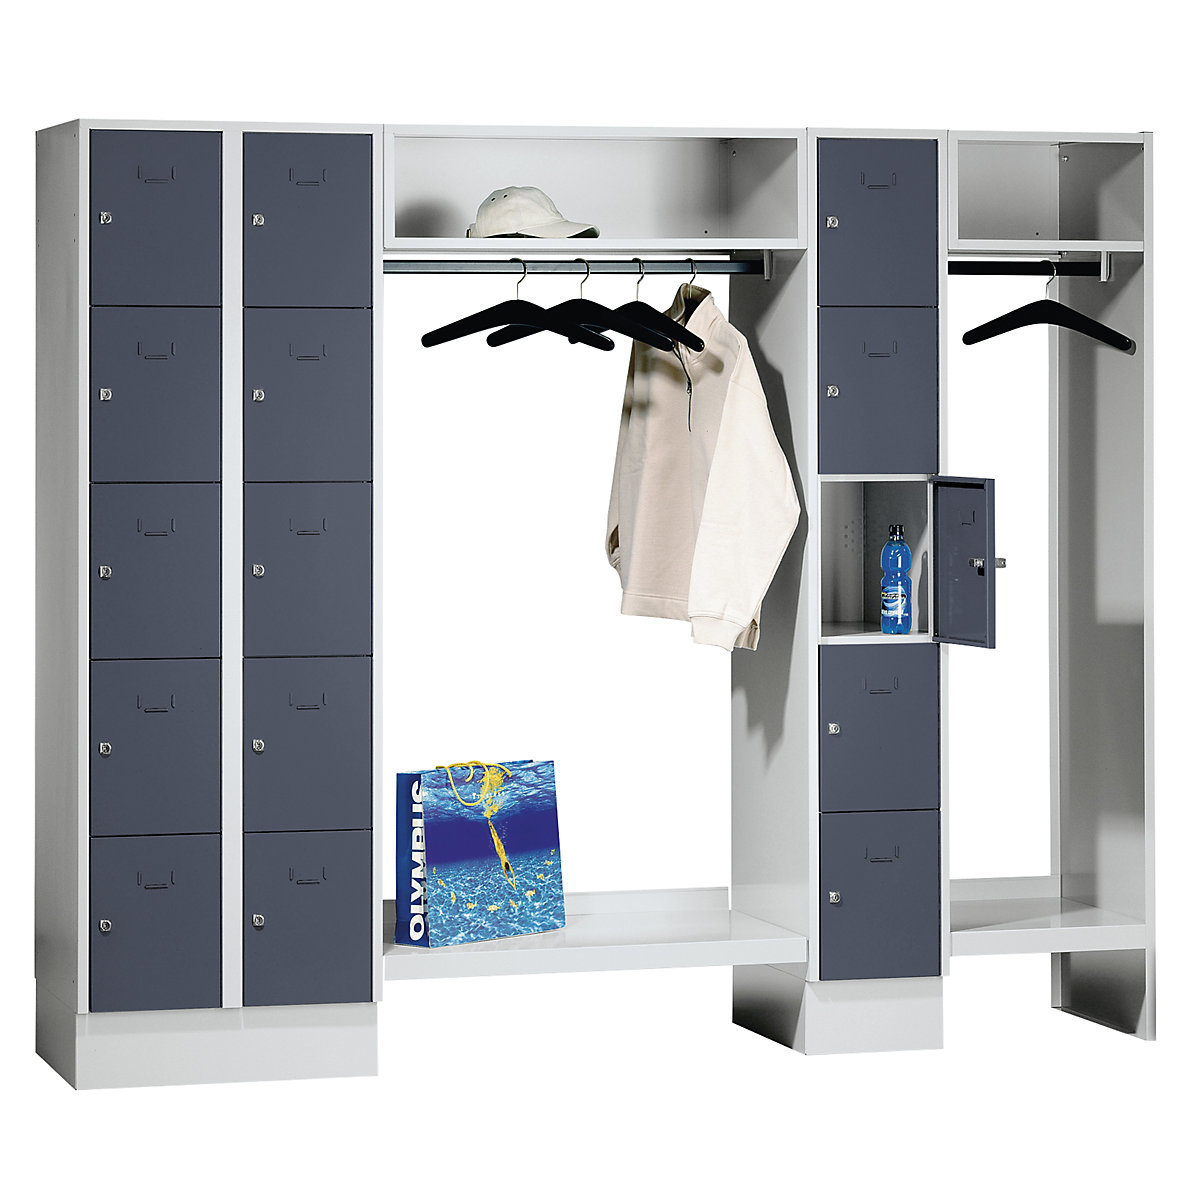 Cloakroom locker system – Wolf, 15 compartments left / centre, 15 coat hangers, overall width 2220 mm, compartment width 298 mm, basalt grey/light grey-10